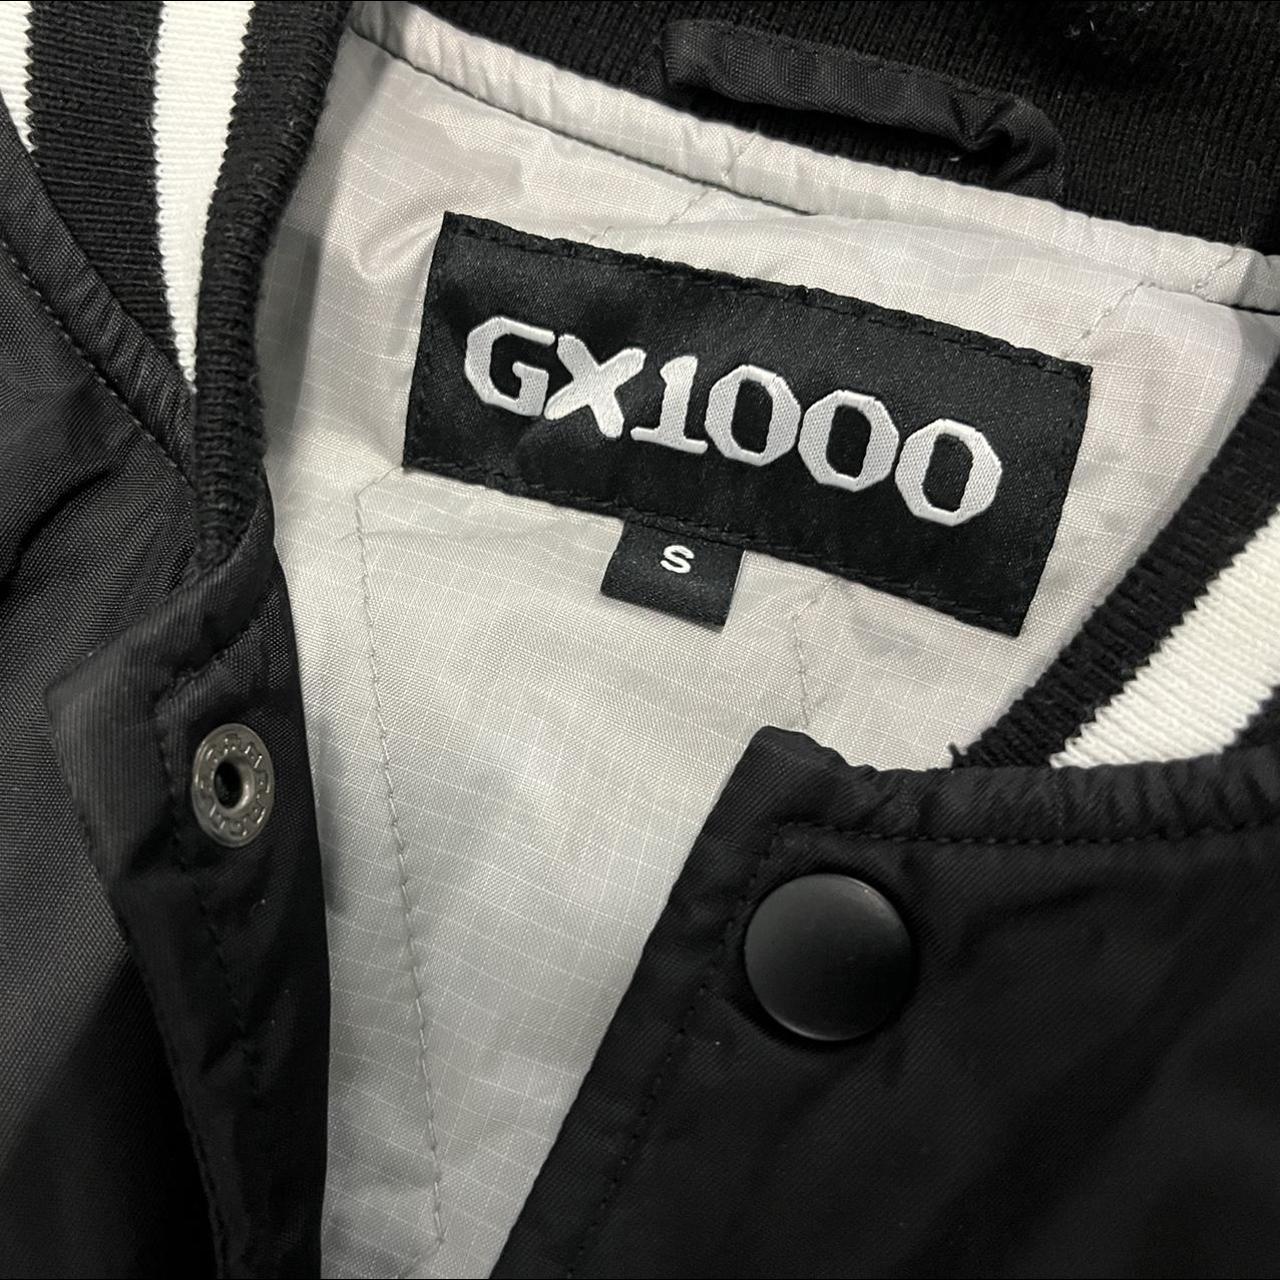 GX1000 Bomber jacket Size Small. Excellent... - Depop